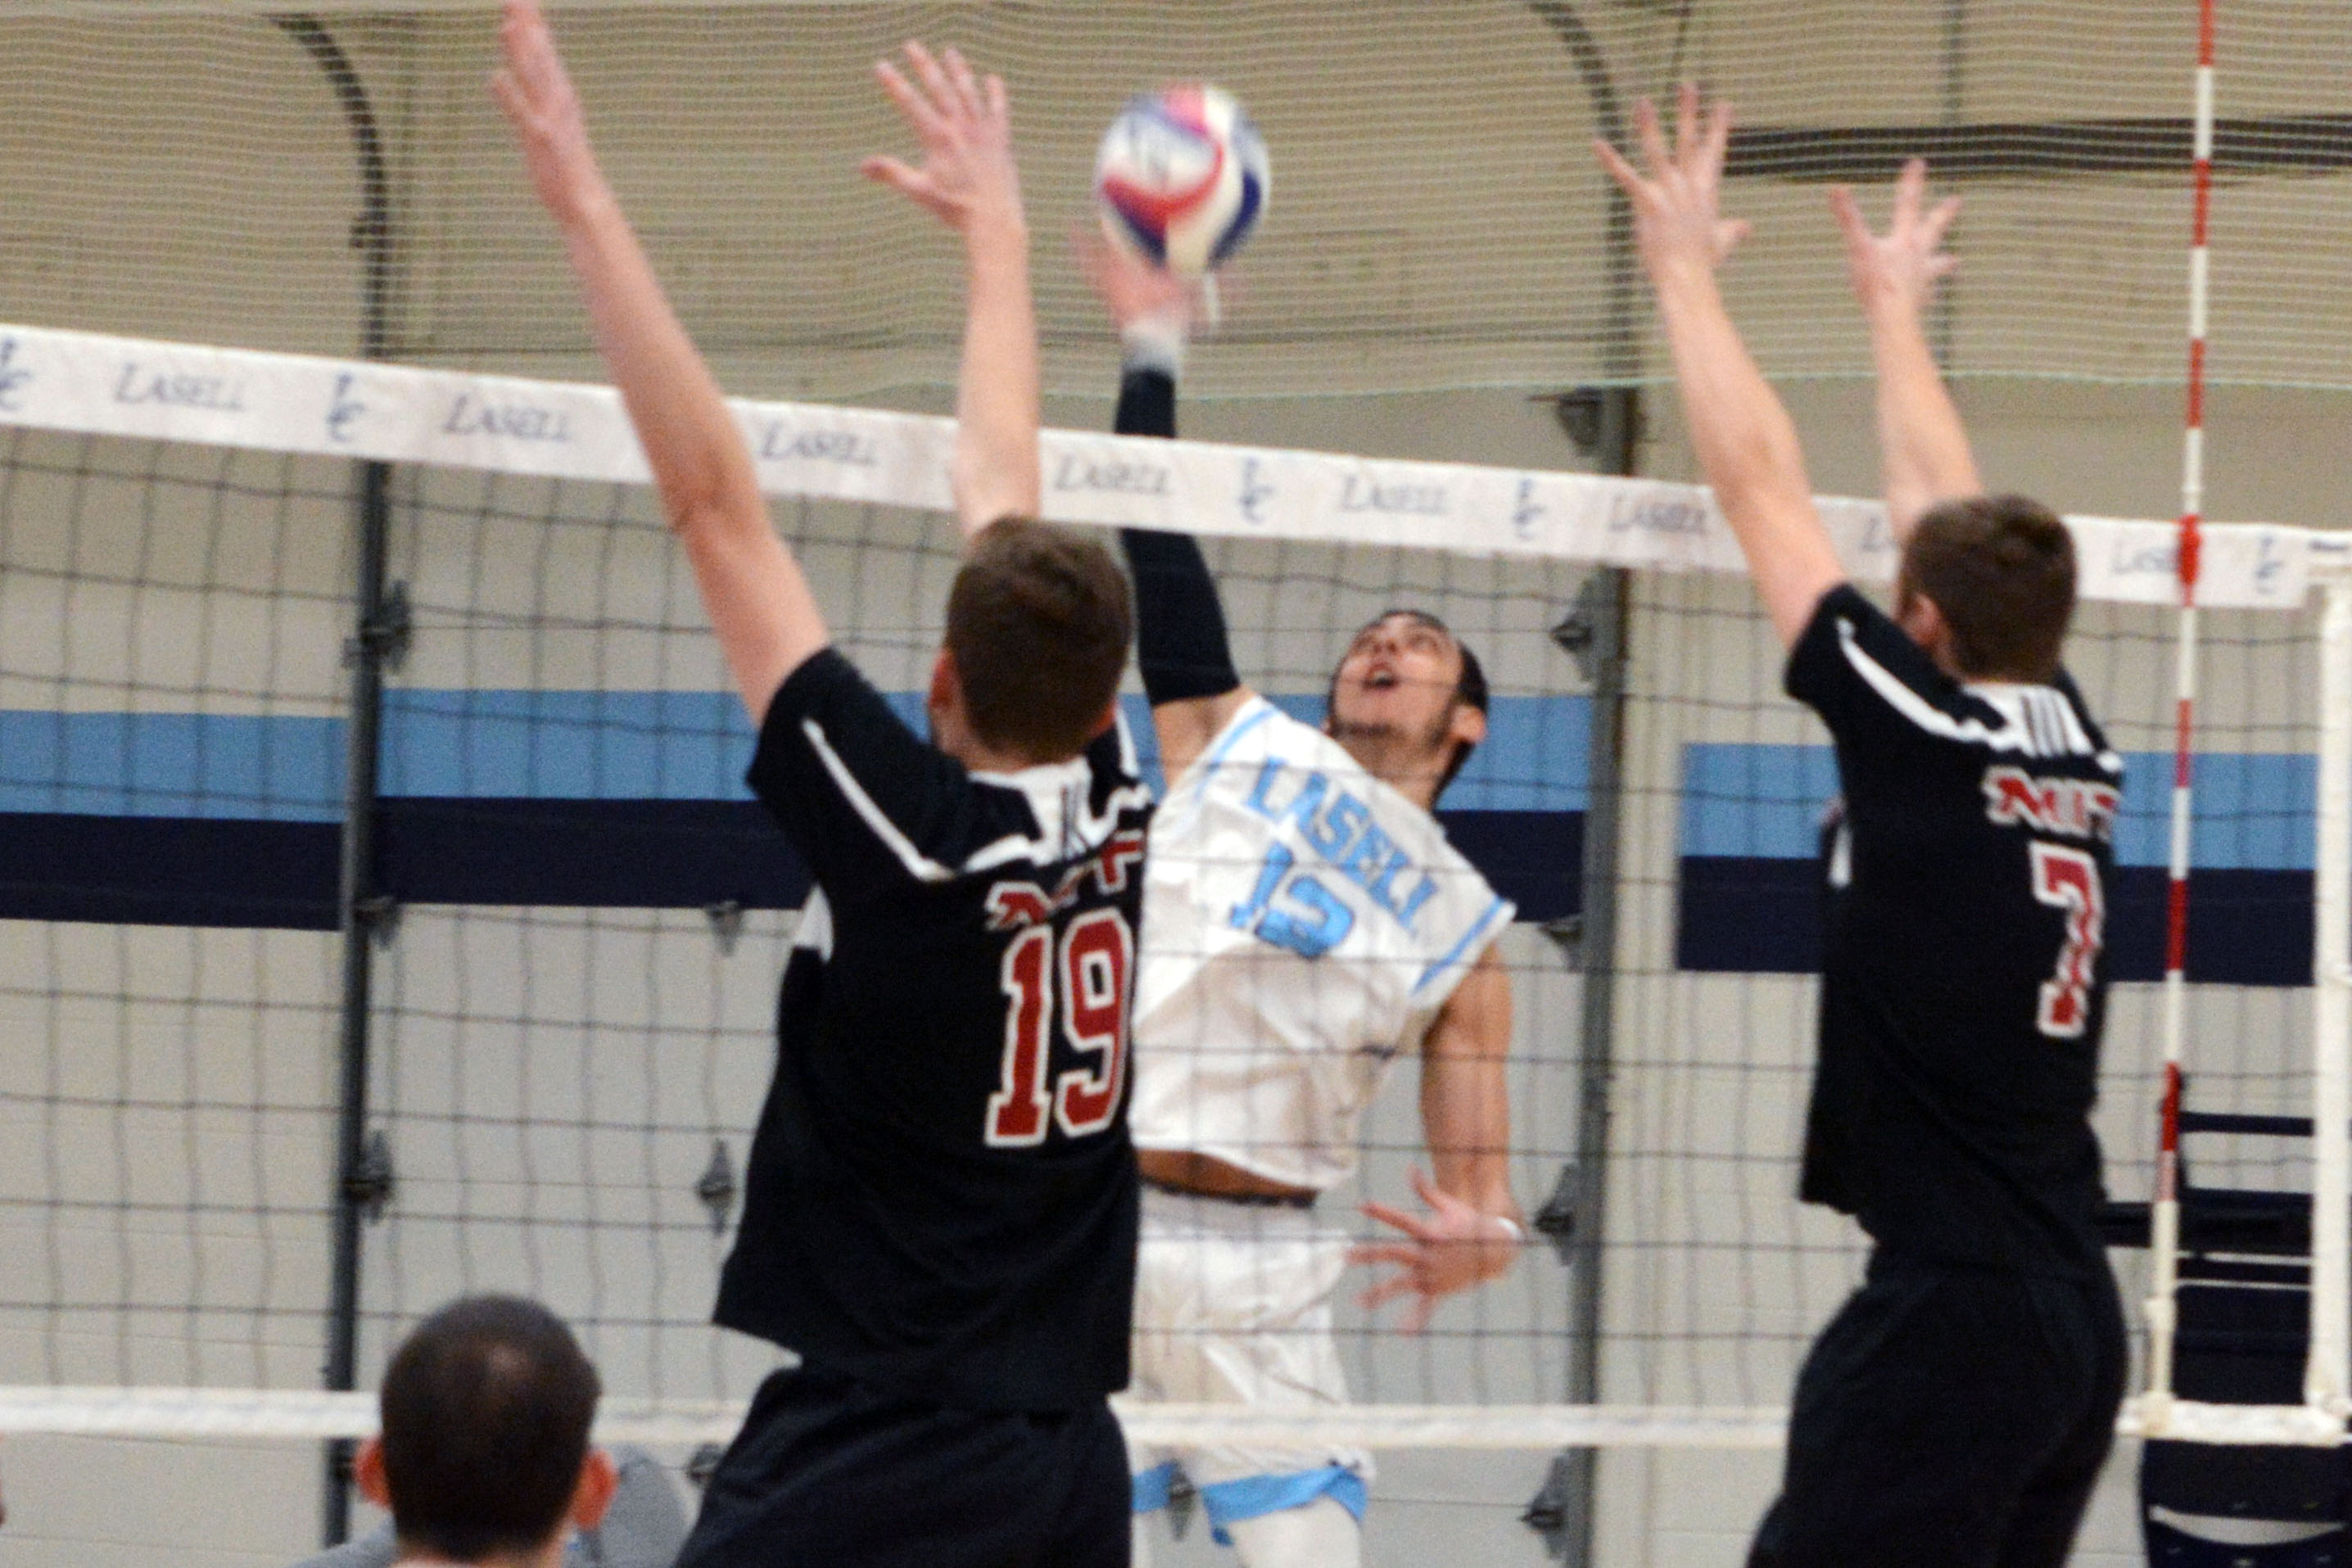 Lasell Men’s Volleyball drops pair in home opener